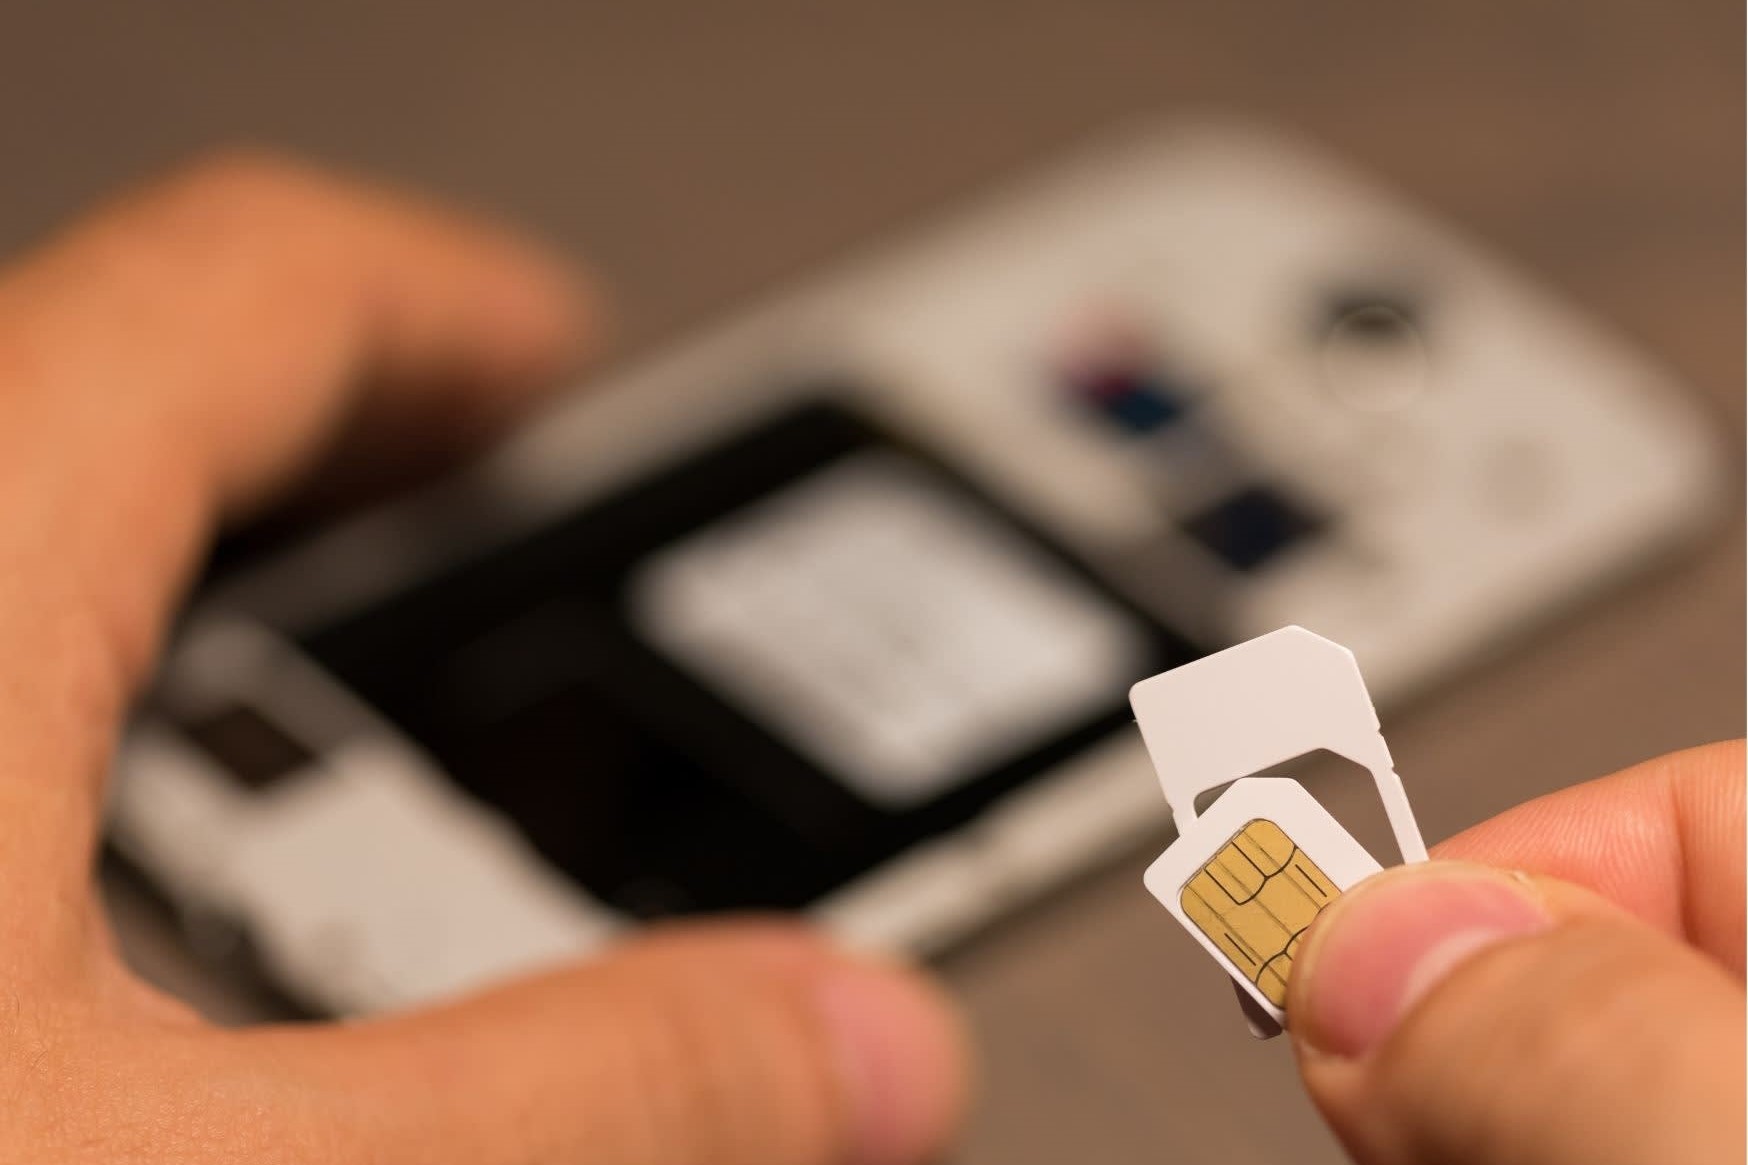 Placing A SIM Card In A Phone: Step-by-Step Guide